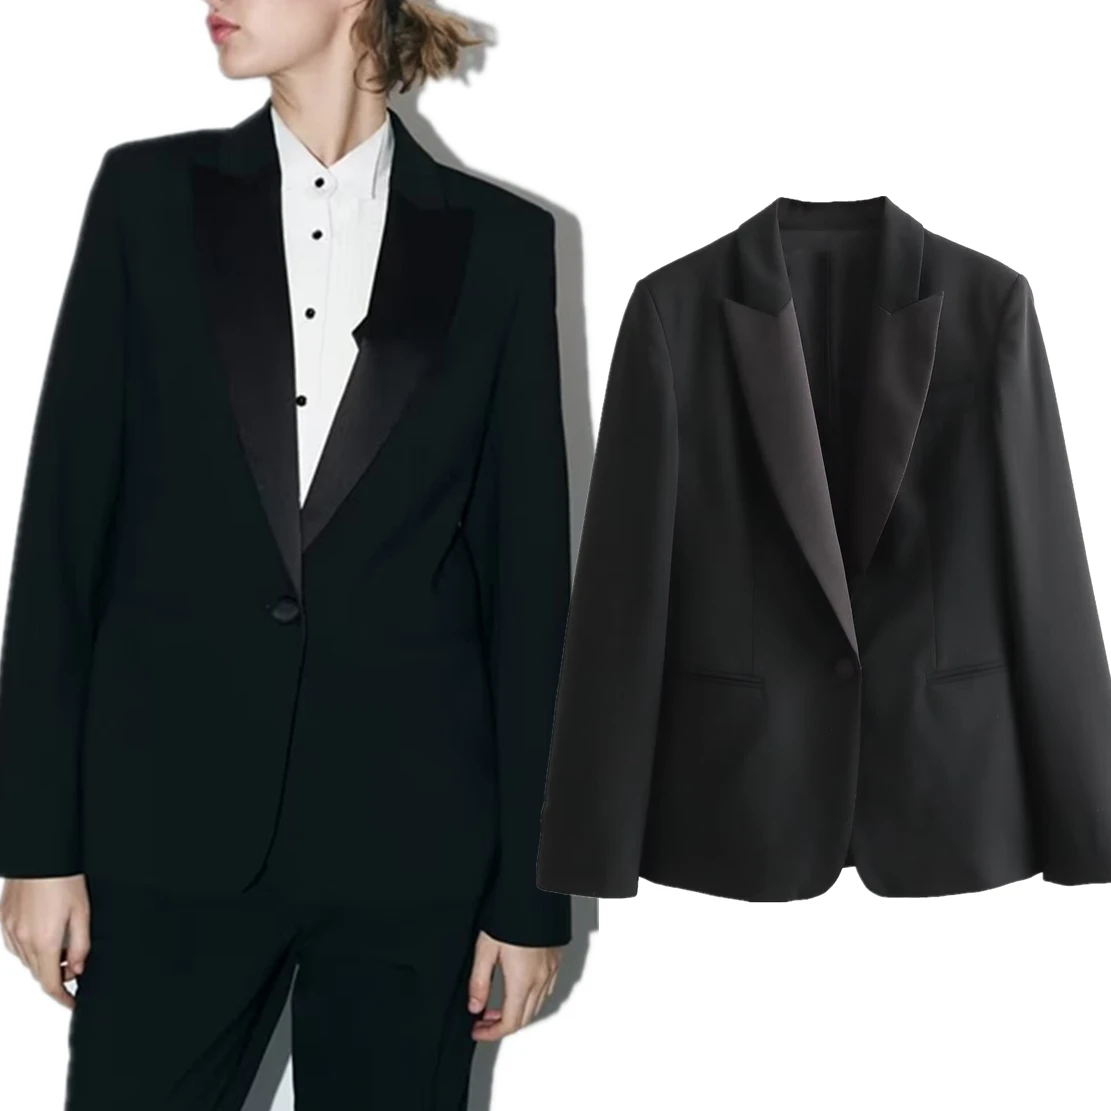 Maxdutti French Style Party Shawl Collar Blazers WOmen Satin Patchwork Casual Black Suits Ladies elmsk french style party shawl collar blazers women satin patchwork casual   suits ladies